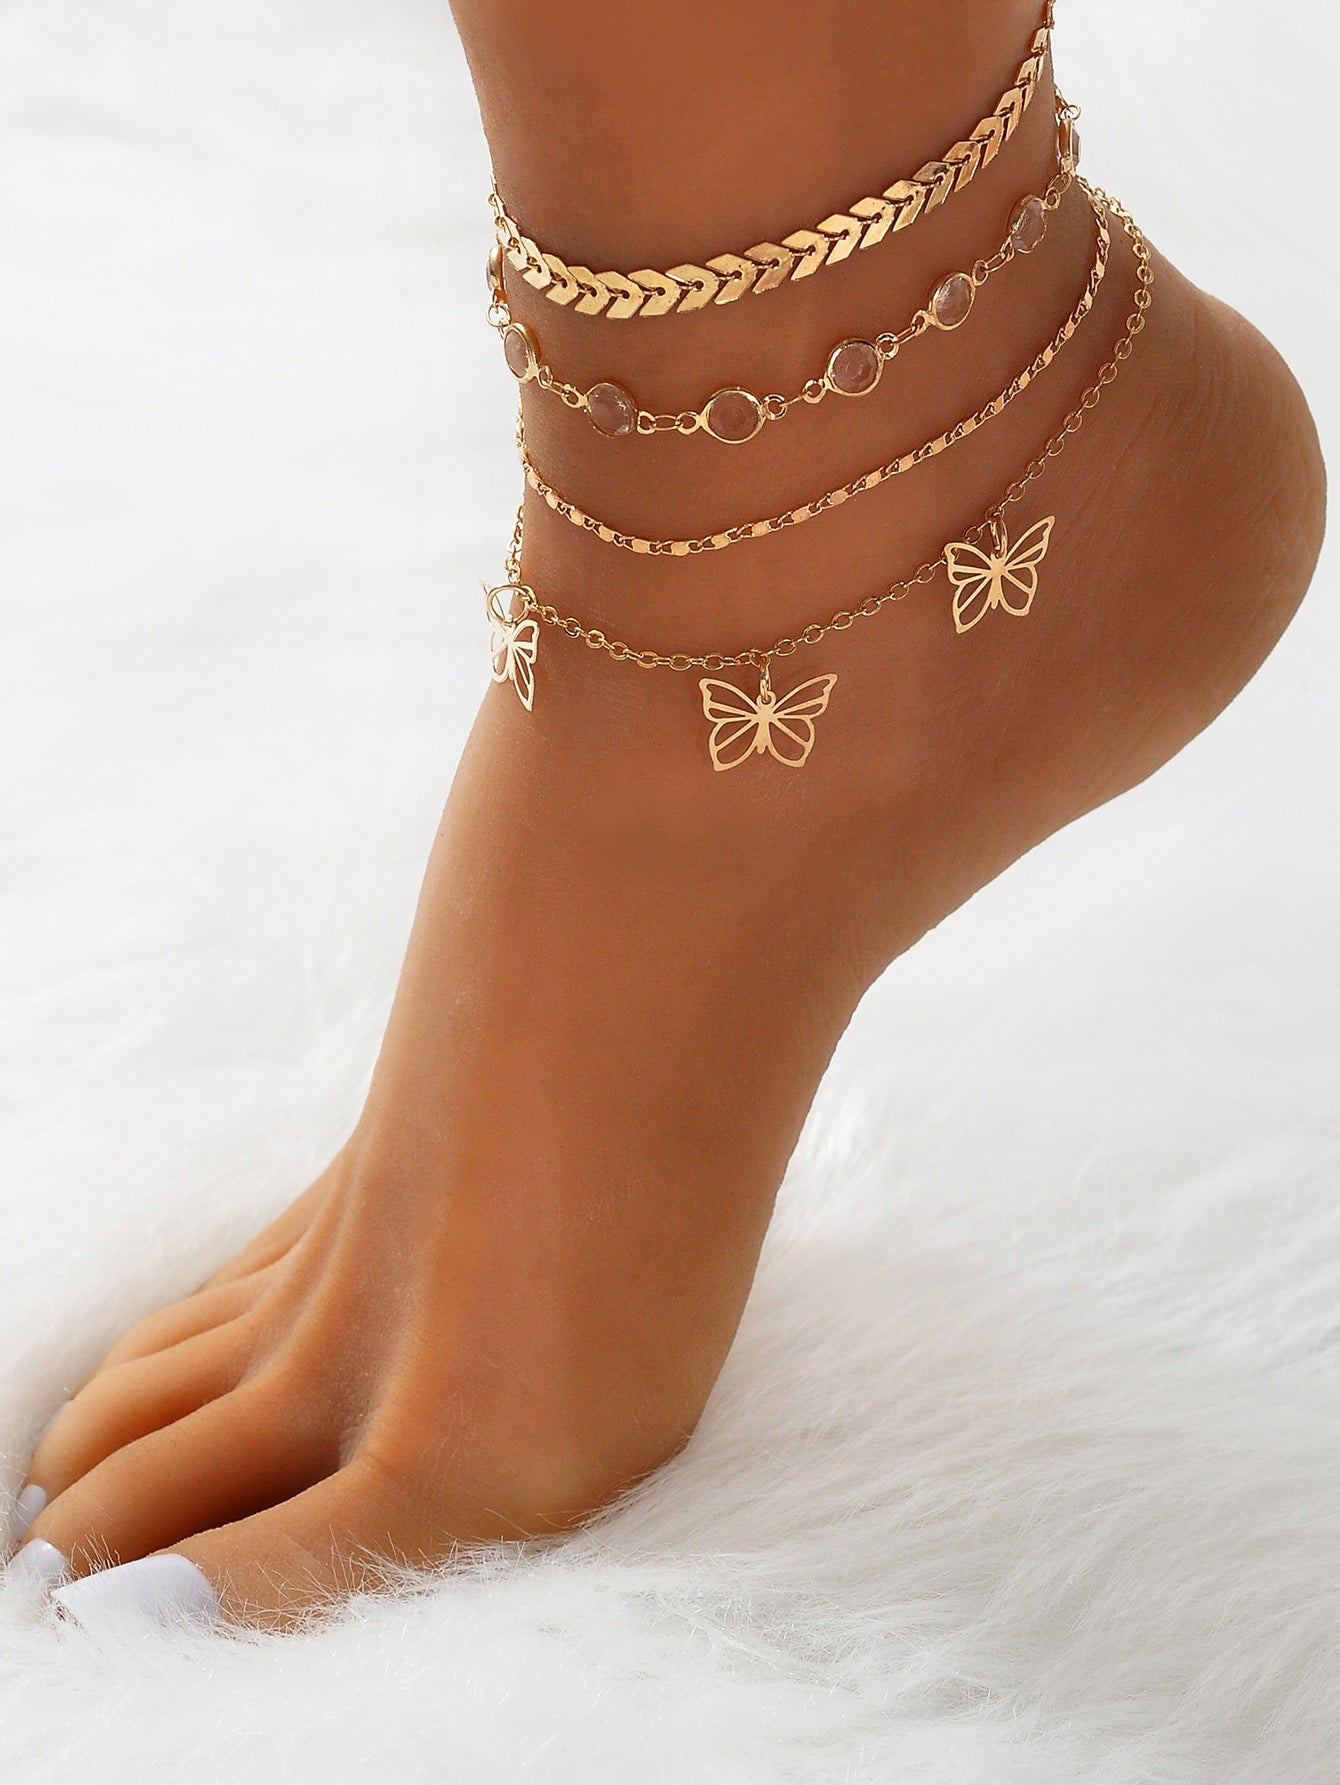 Cute Butterfly Anklet Charm Jewelry